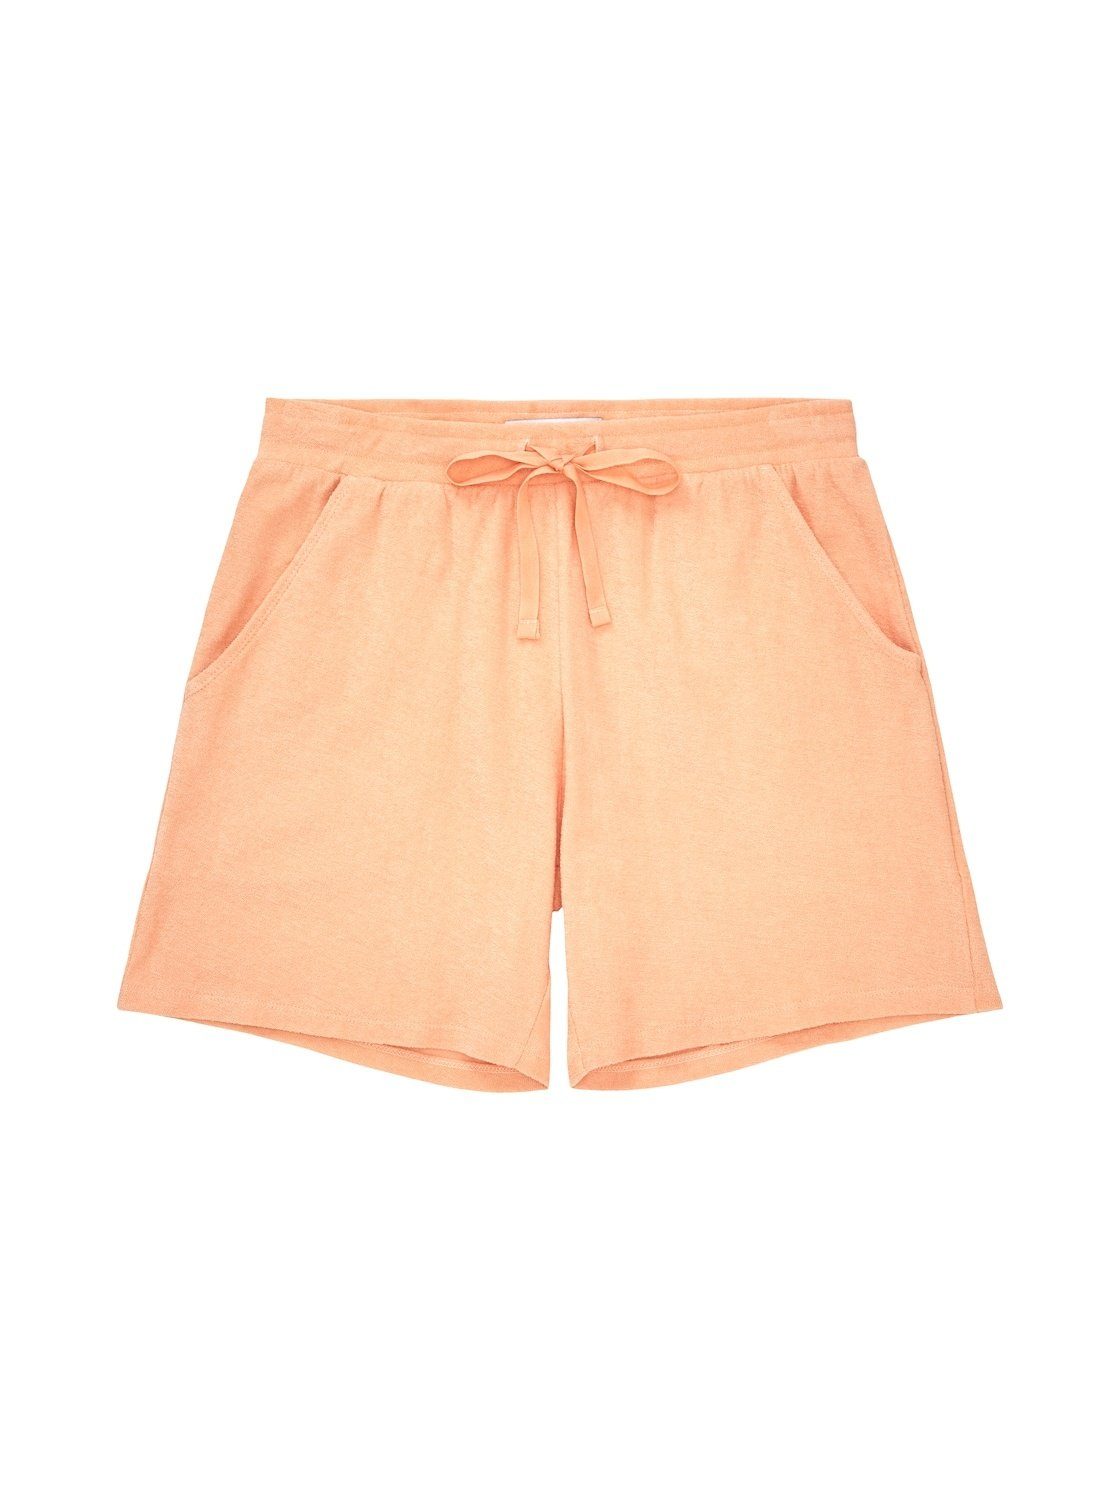 Schlafshorts TAILOR Shorts TOM Frottee